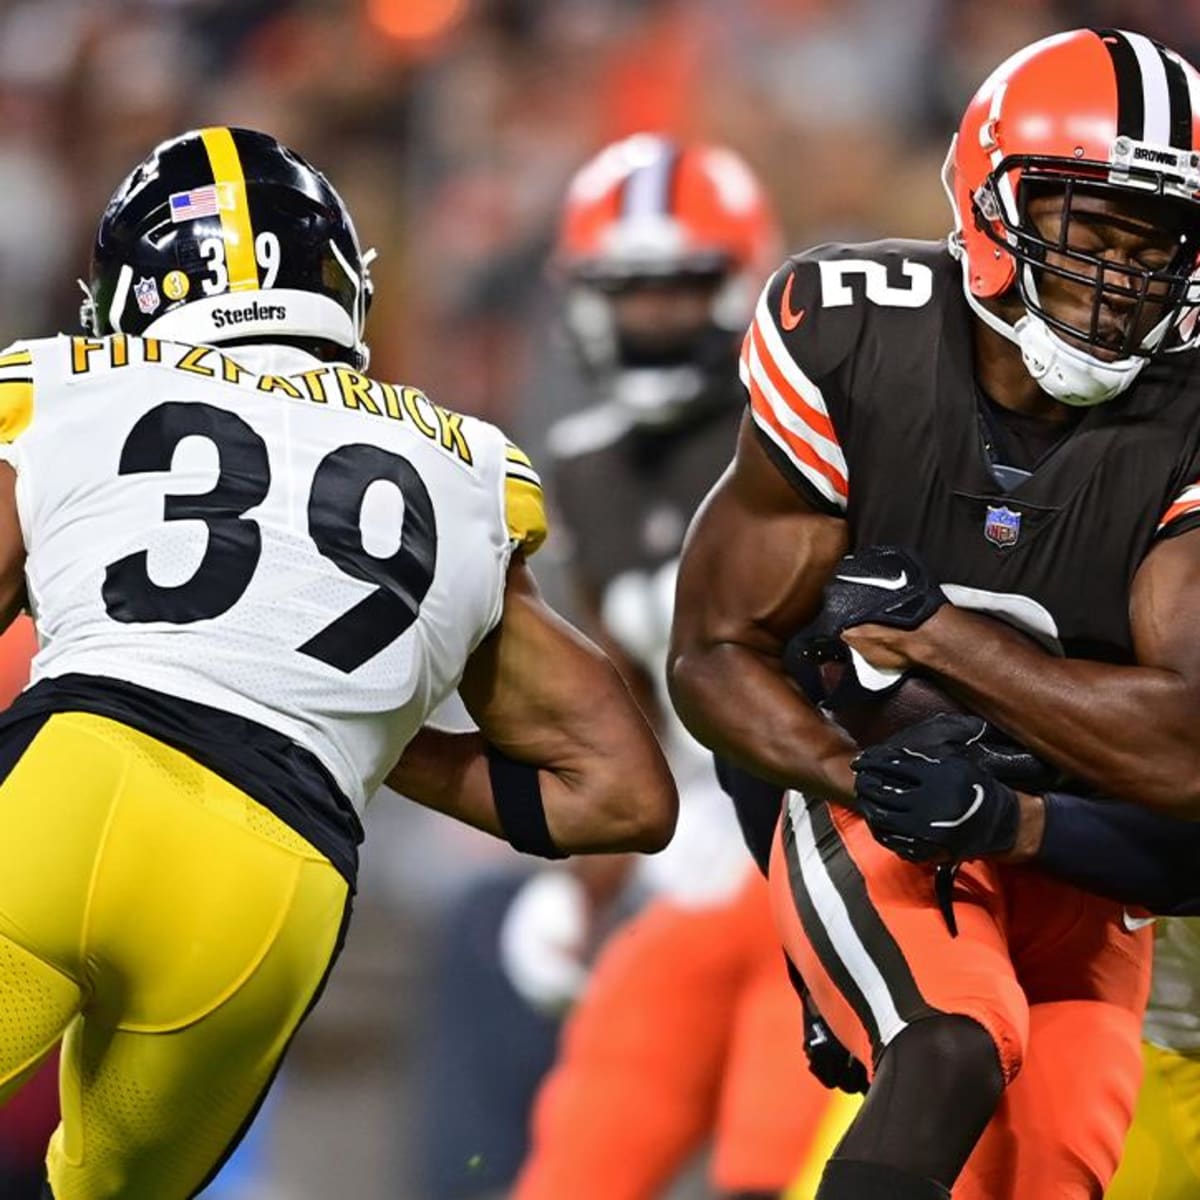 Browns-Steelers Week 18 odds, lines and spread - Sports Illustrated